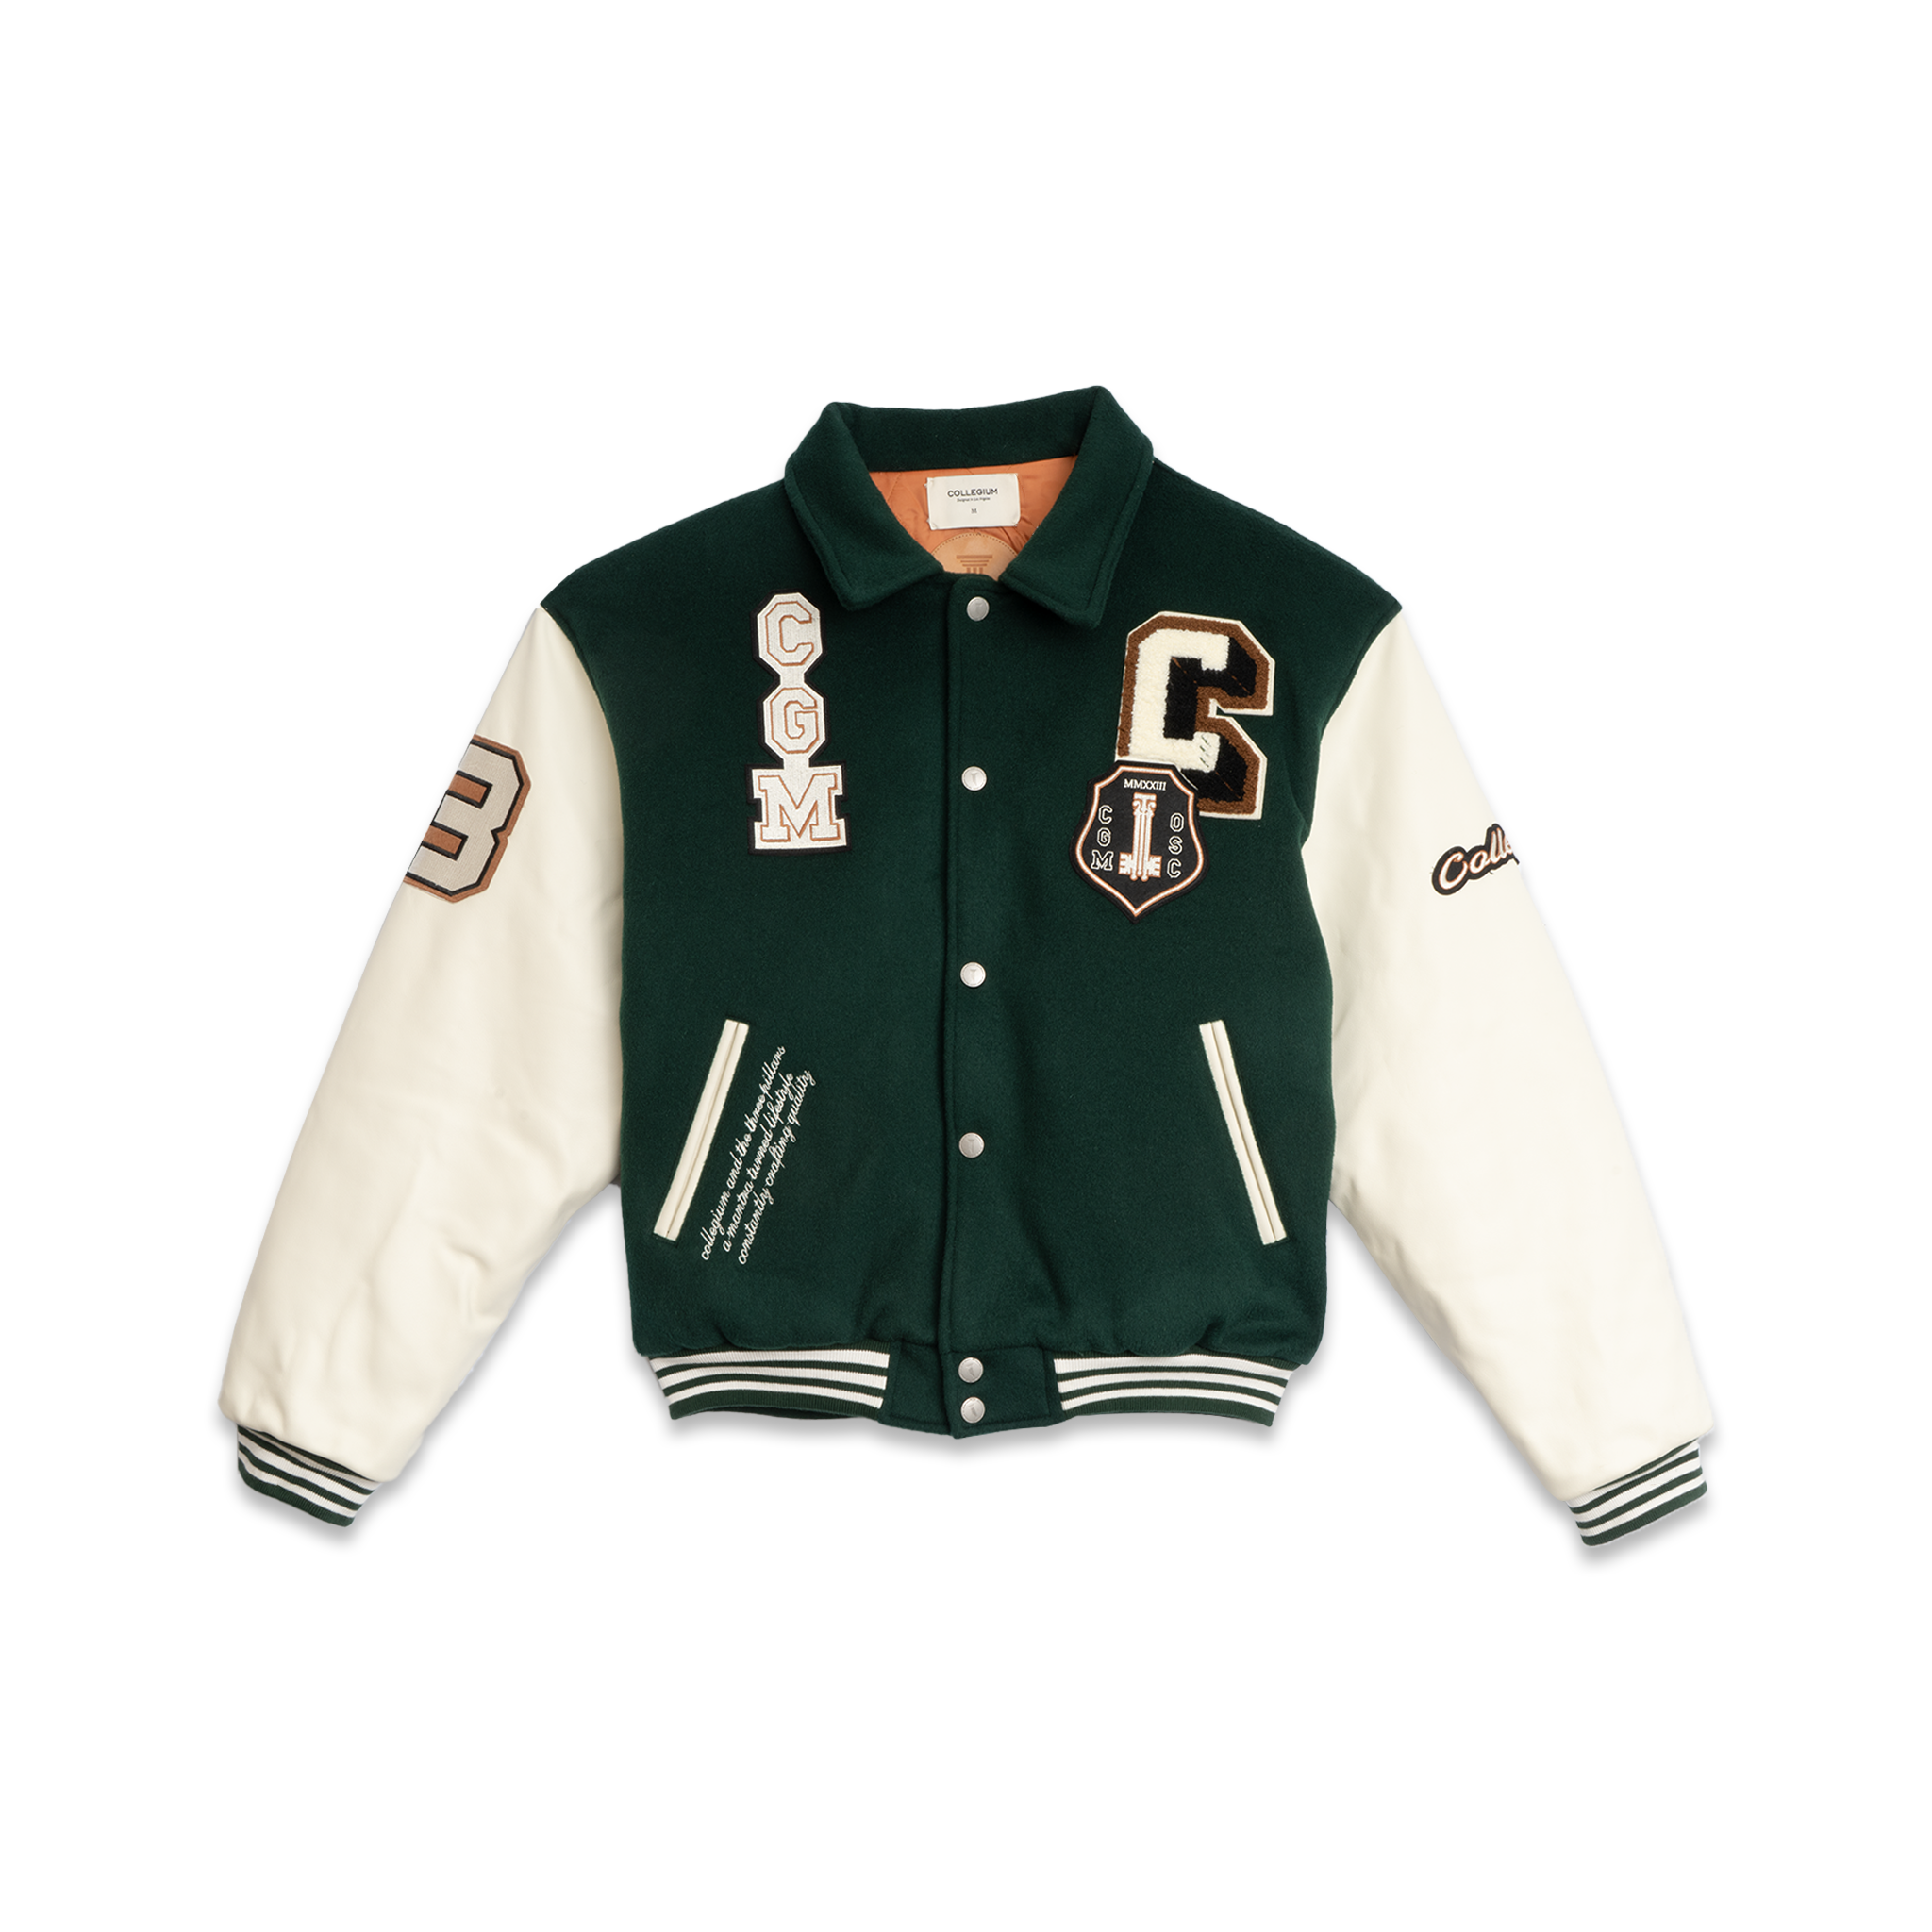 Where to Buy Princess Diana's Iconic Letterman Jacket from the '90s